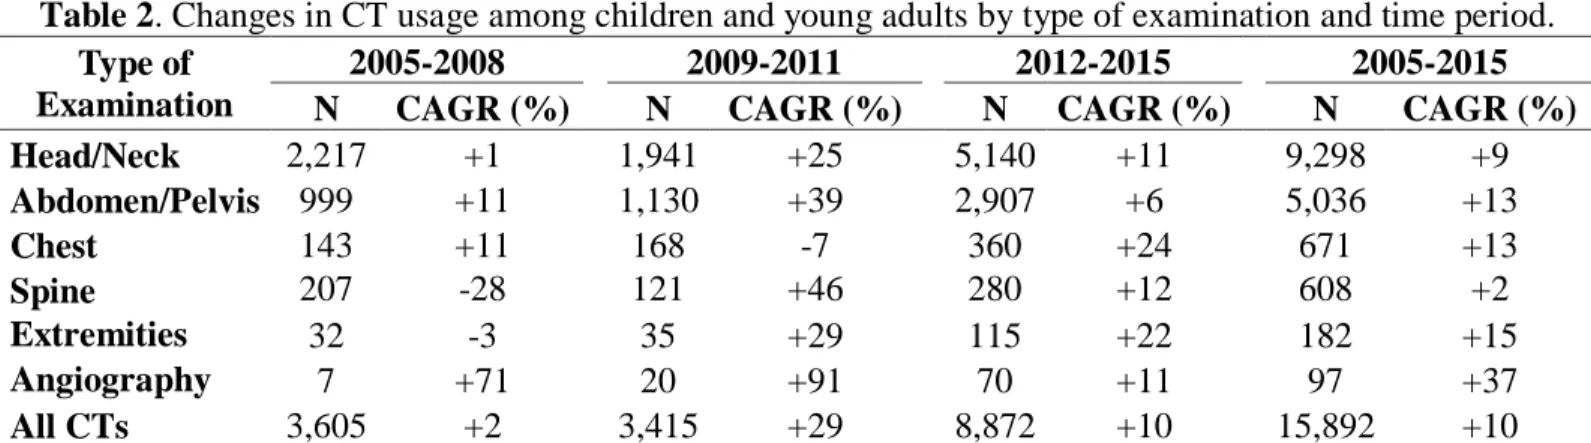 Table 2. Changes in CT usage among children and young adults by type of examination and time period